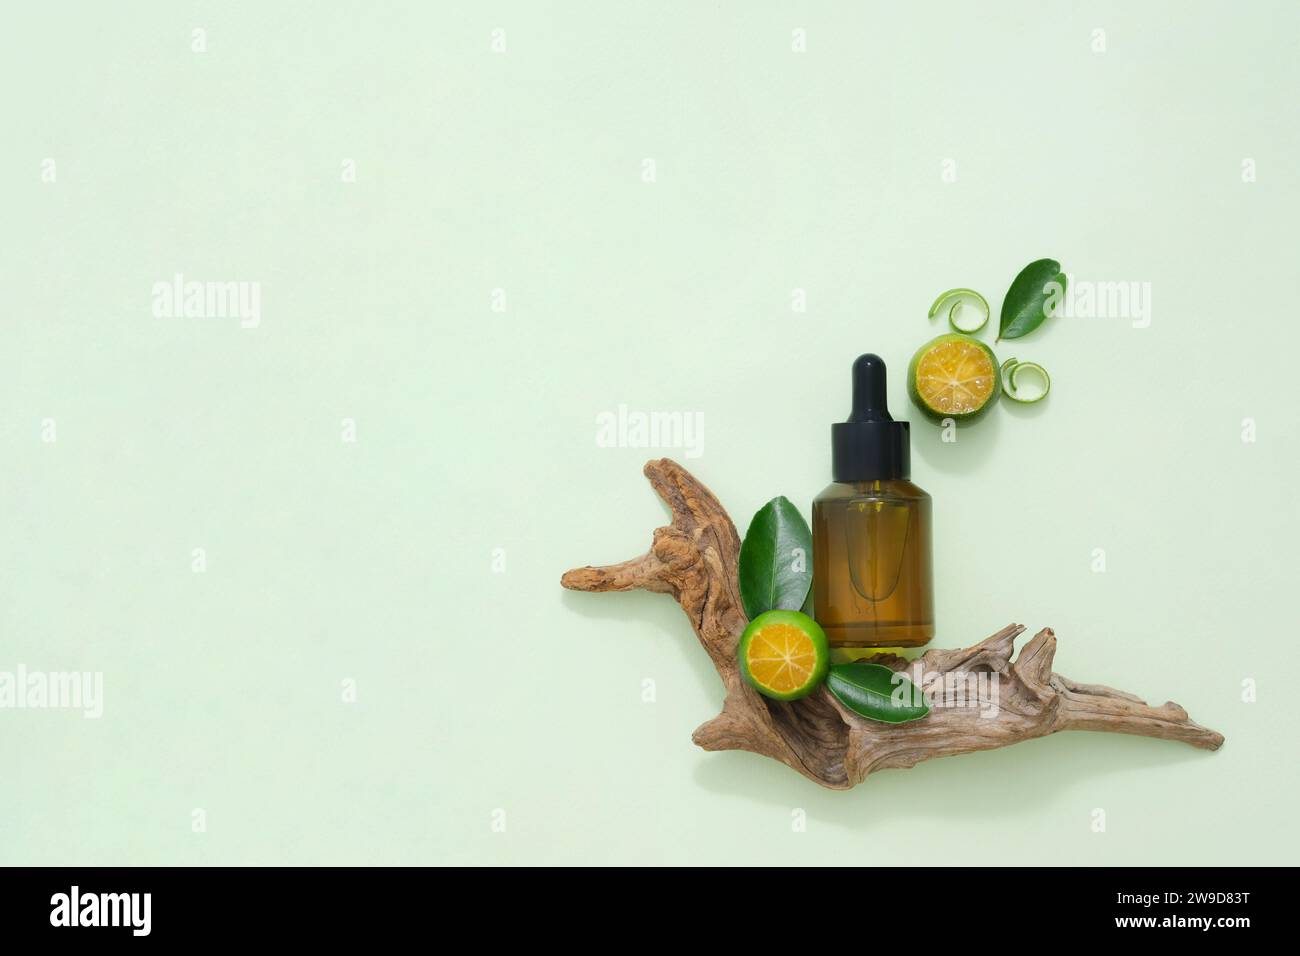 A product bottle mockup displayed with dry twig, kumquat slices and leaves on green background. Copy space for cosmetics, business branding and produc Stock Photo